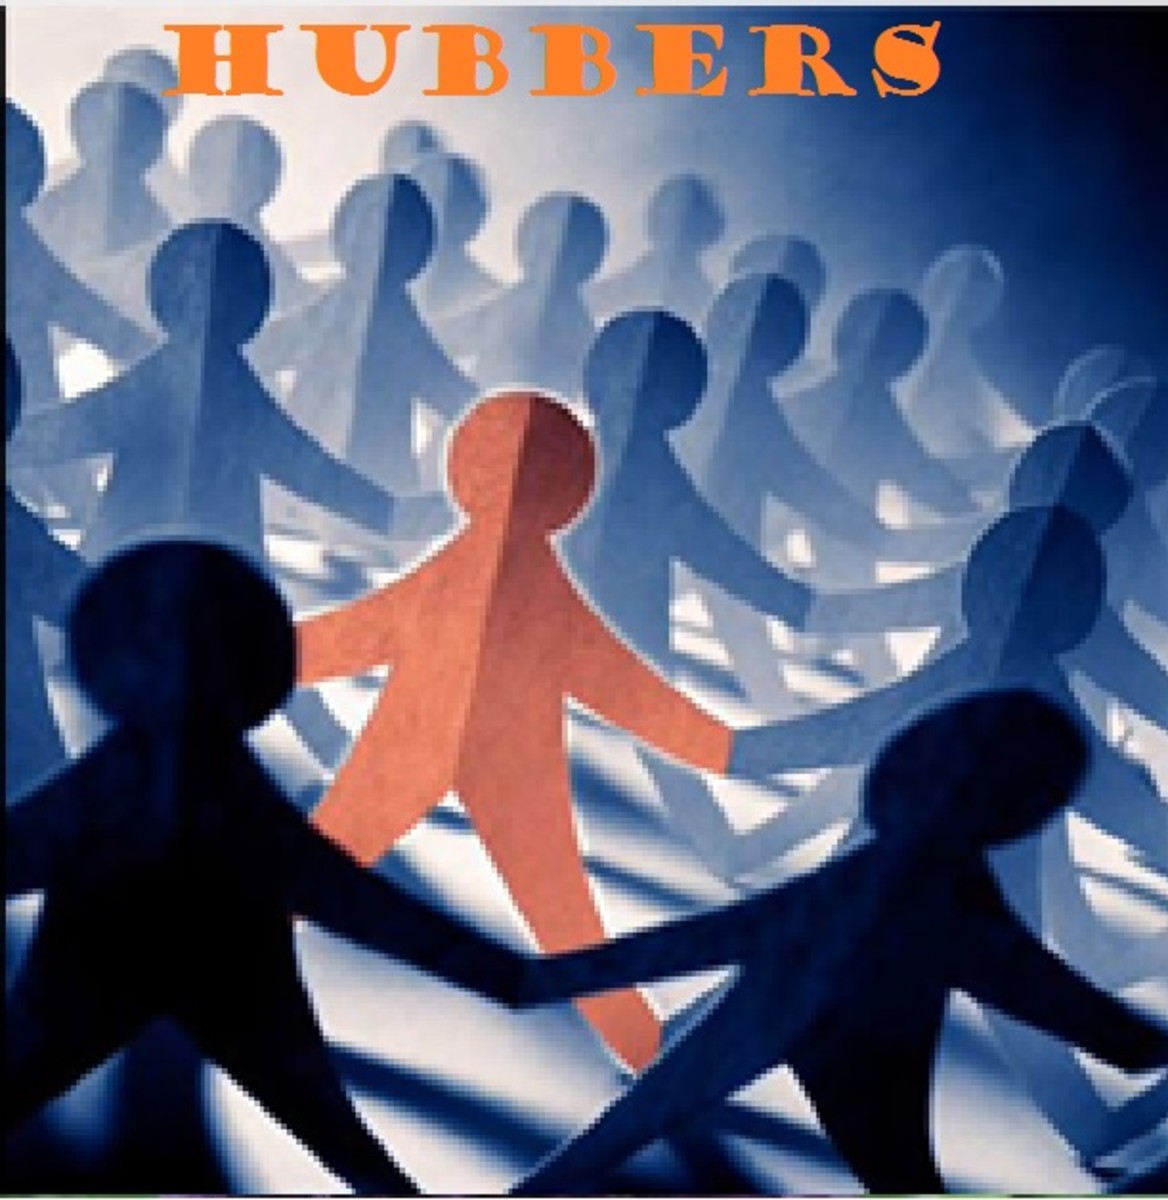 Supporting Hubbers to help to keep each other Centered